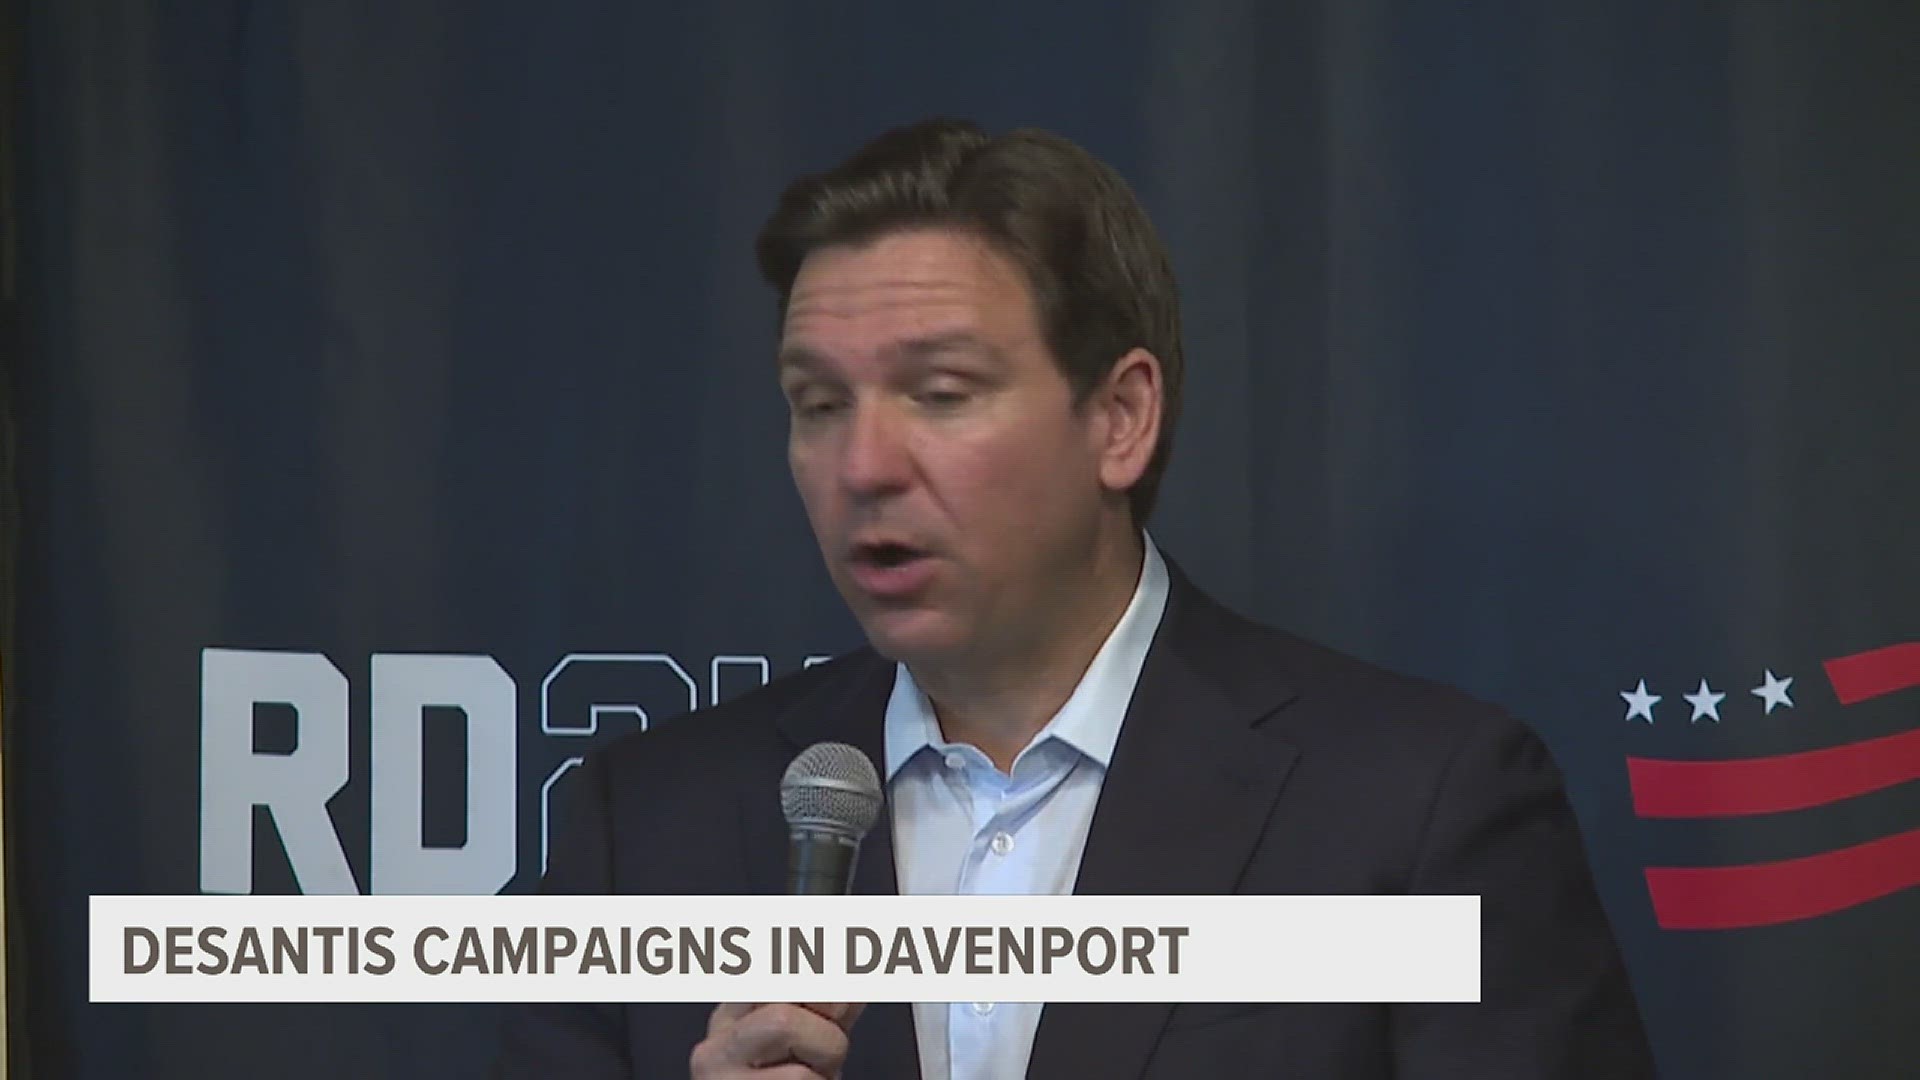 A Des Moines register polls showed DeSantis tied with Nikki Haley for second in Iowa, 27 percentage points behind former president Donald Trump.